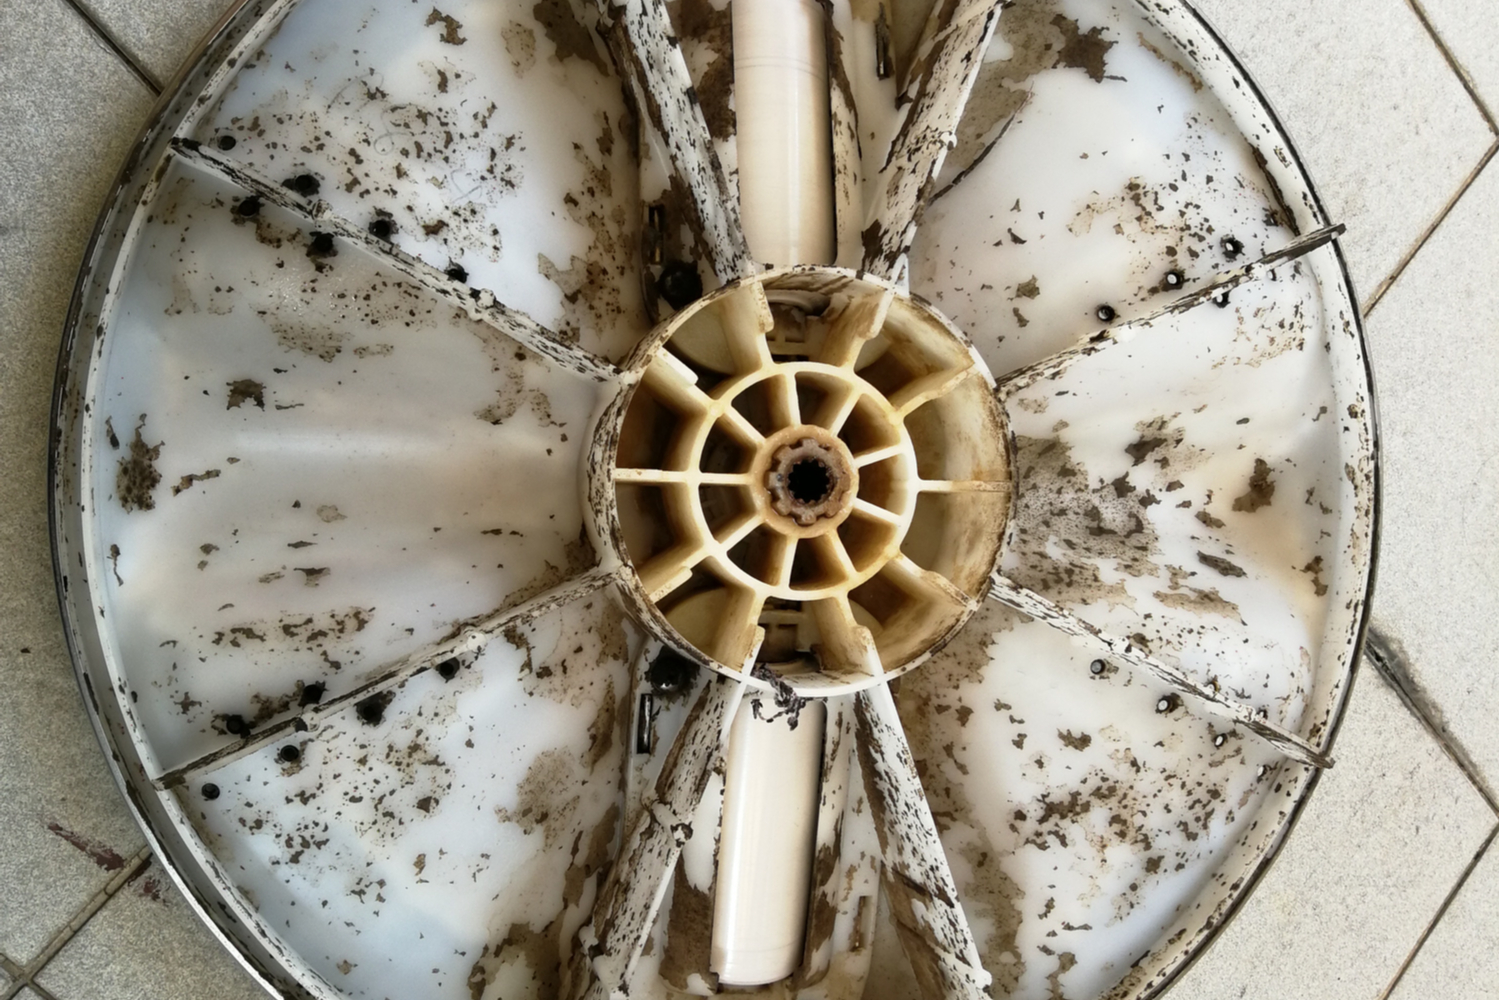 Removing Mold from Washing Machines